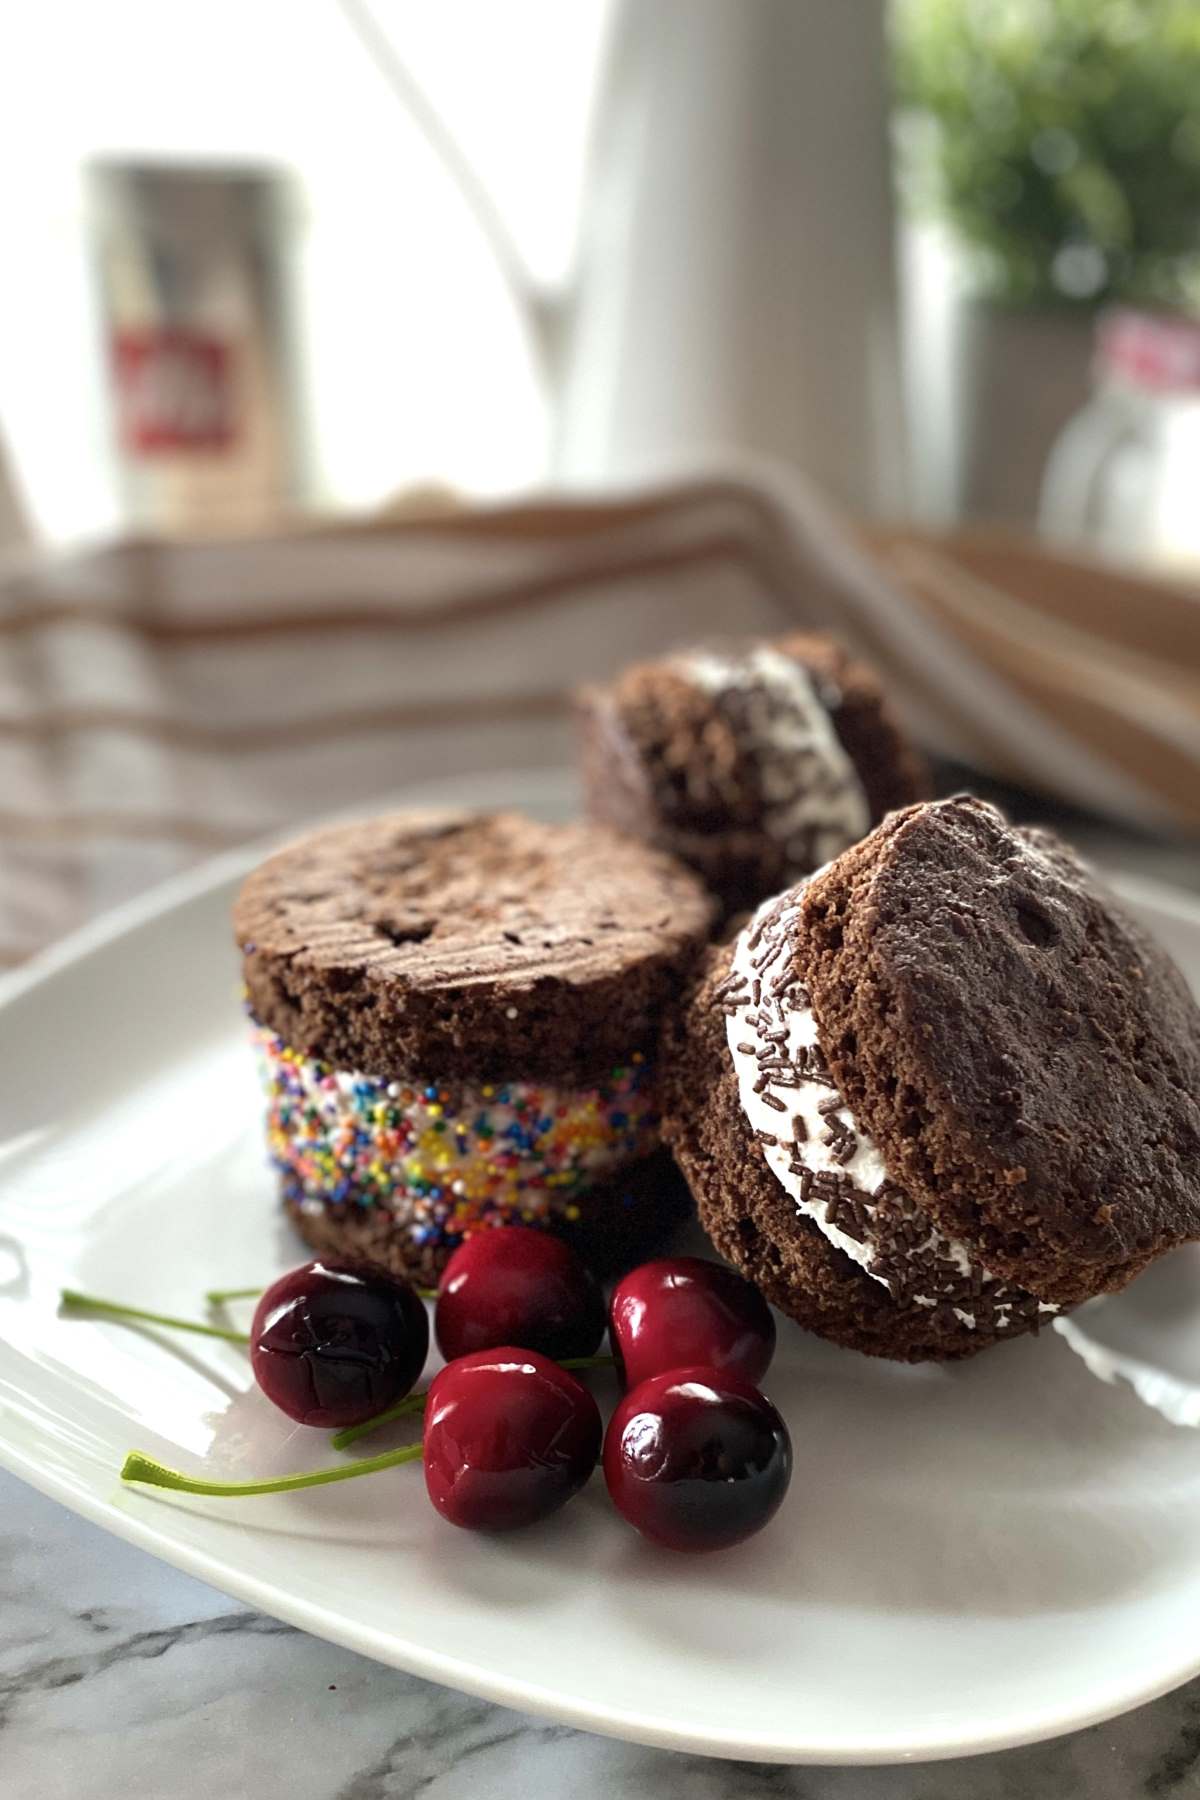 Chocolate Sandwich filled with Ice cream on a white plate with cherries